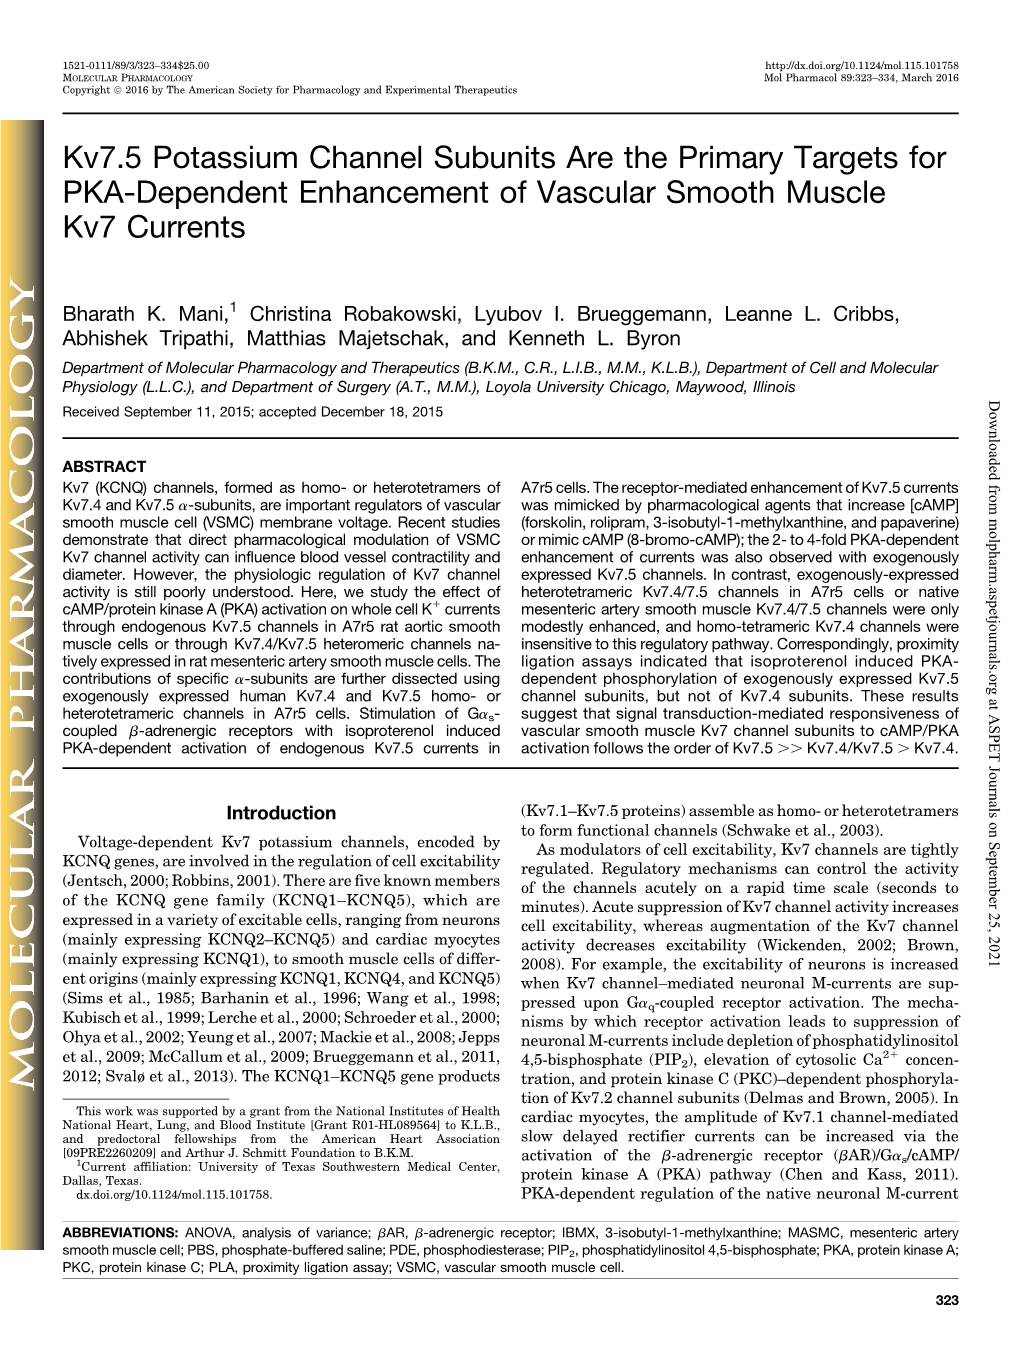 Kv7.5 Potassium Channel Subunits Are the Primary Targets for PKA-Dependent Enhancement of Vascular Smooth Muscle Kv7 Currents